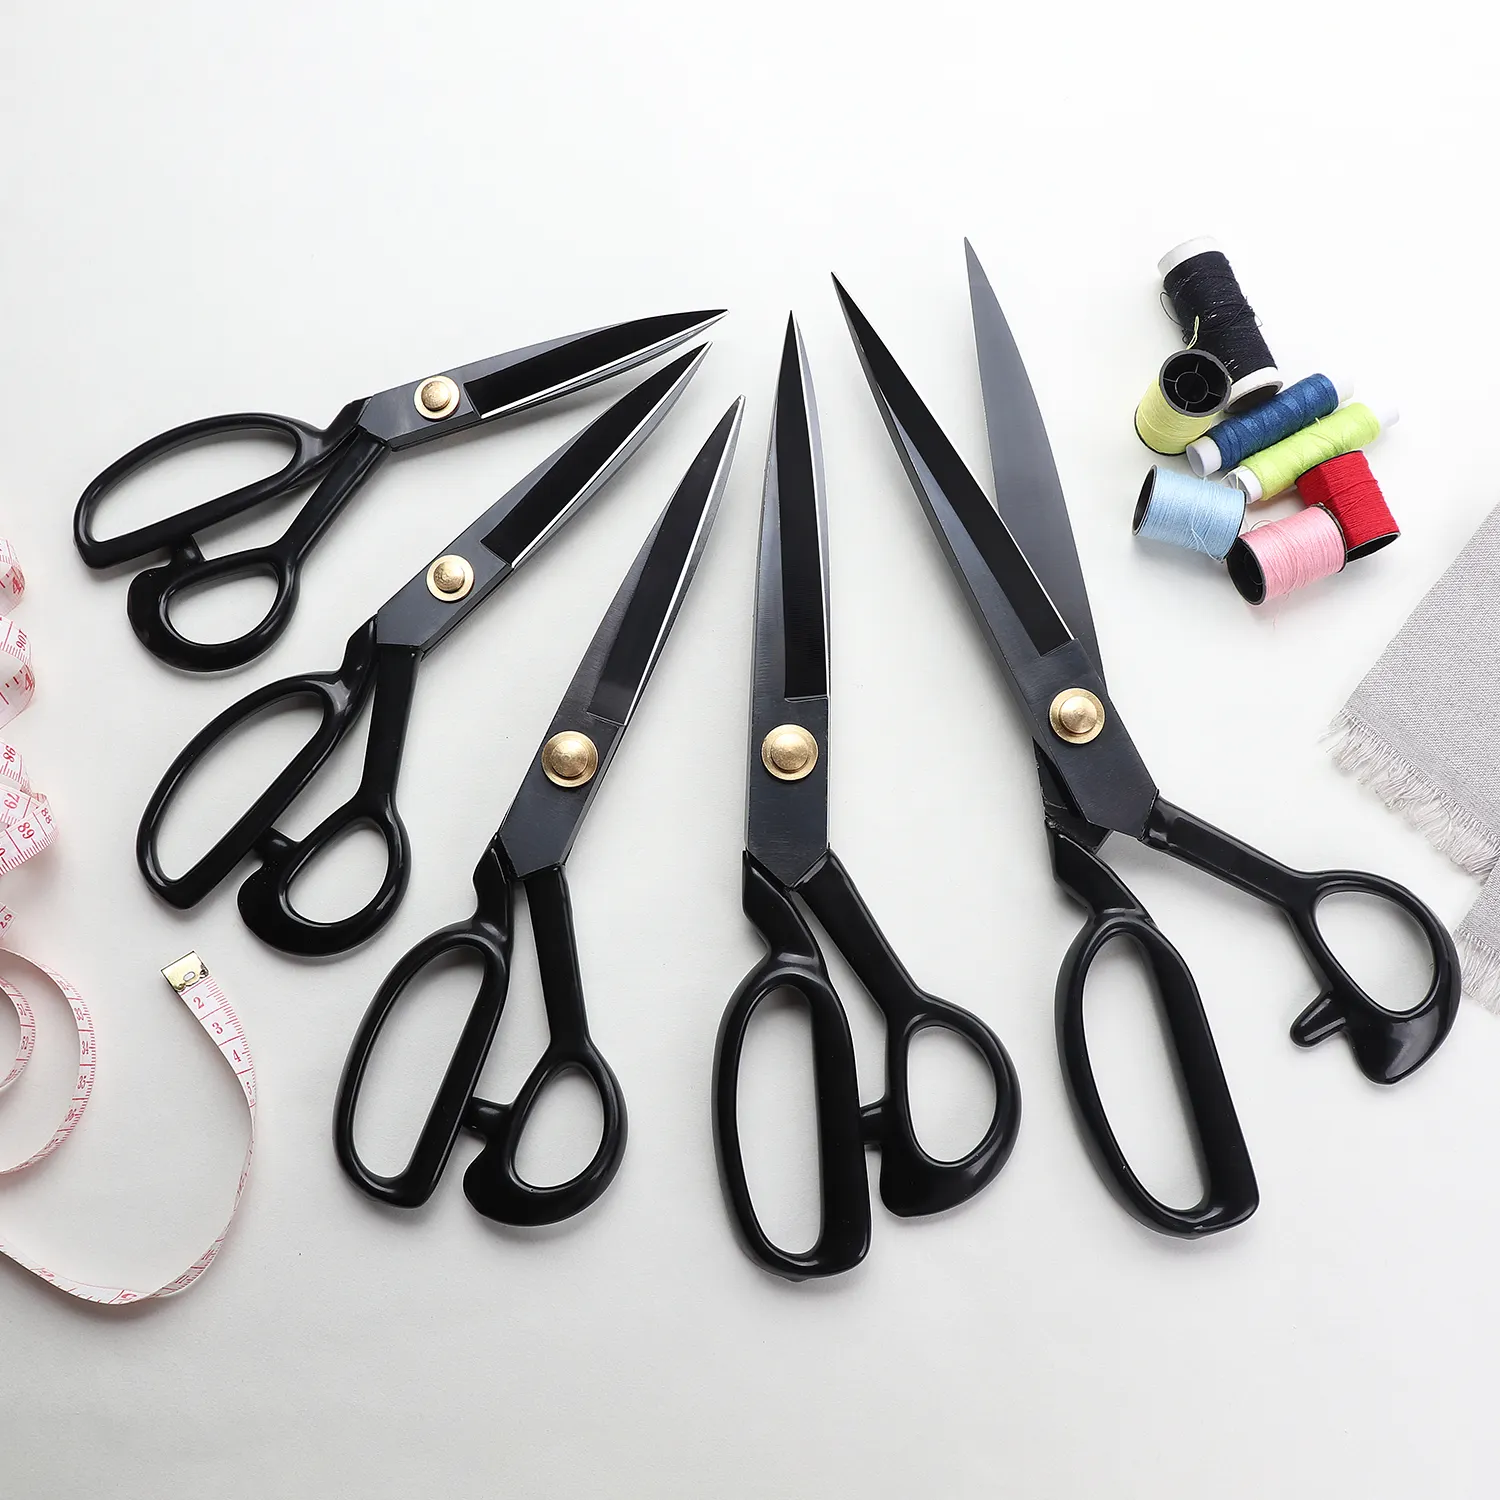 8 Inch Professional High-quality Durable Fabric Scissors Tailor Sewing scissors